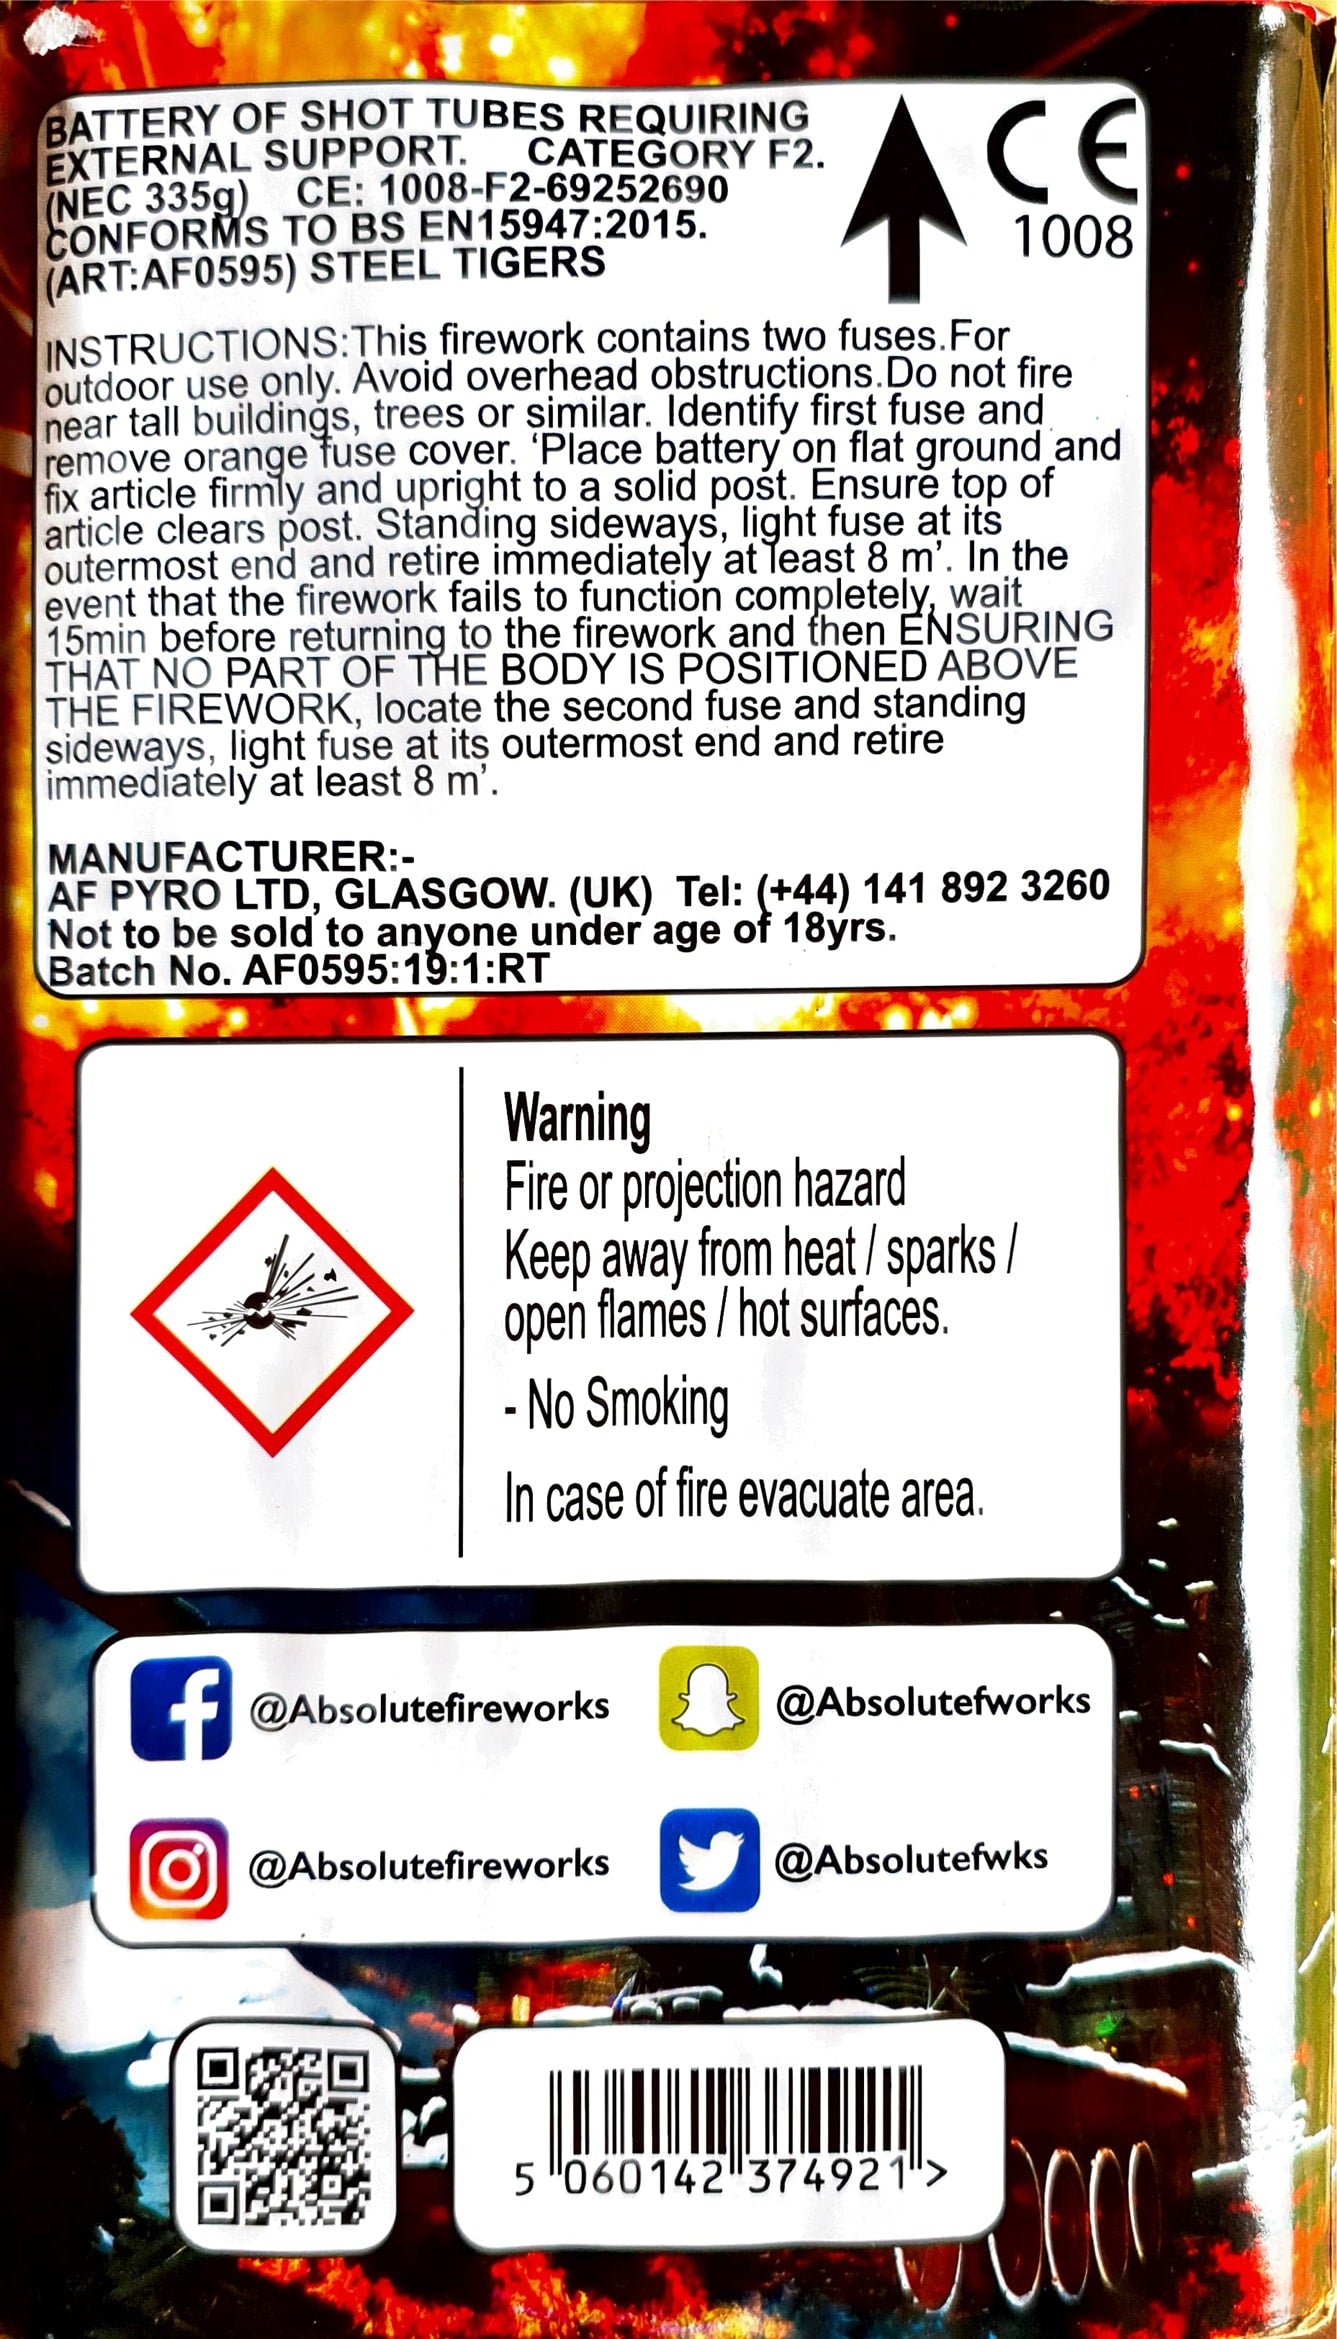 Steel Tigers by Absolute Fireworks Instructions